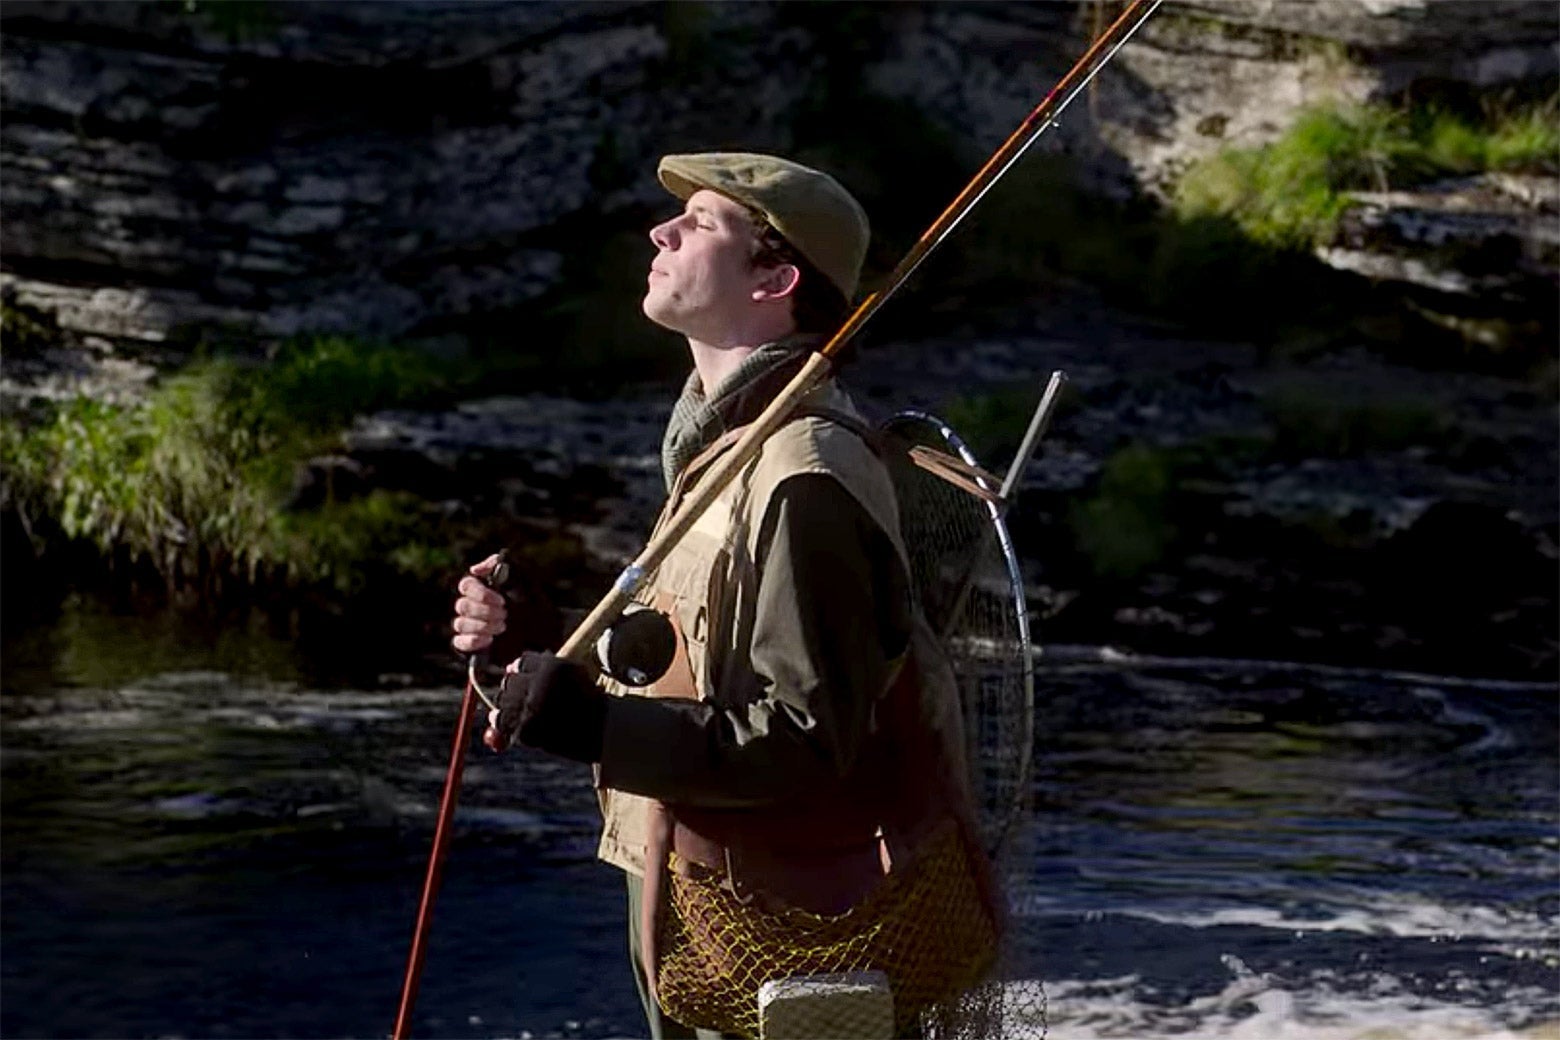 A still from The Crown in which Josh O'Connor as Prince Charles fishing, very incompetently.